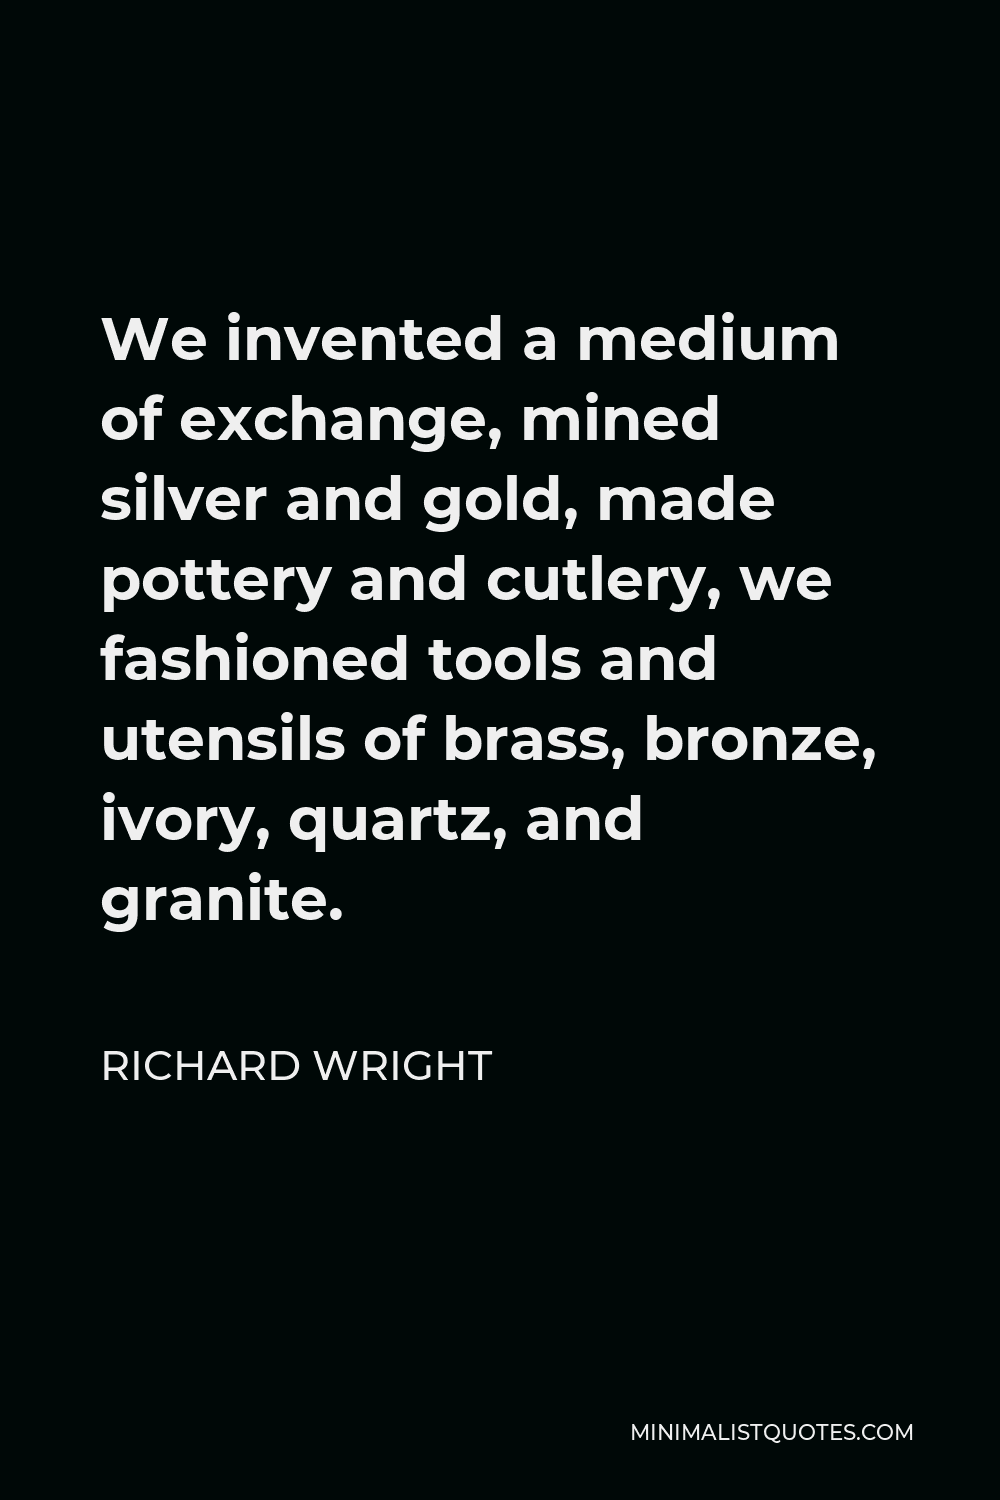 Richard Wright Quote - We invented a medium of exchange, mined silver and gold, made pottery and cutlery, we fashioned tools and utensils of brass, bronze, ivory, quartz, and granite.